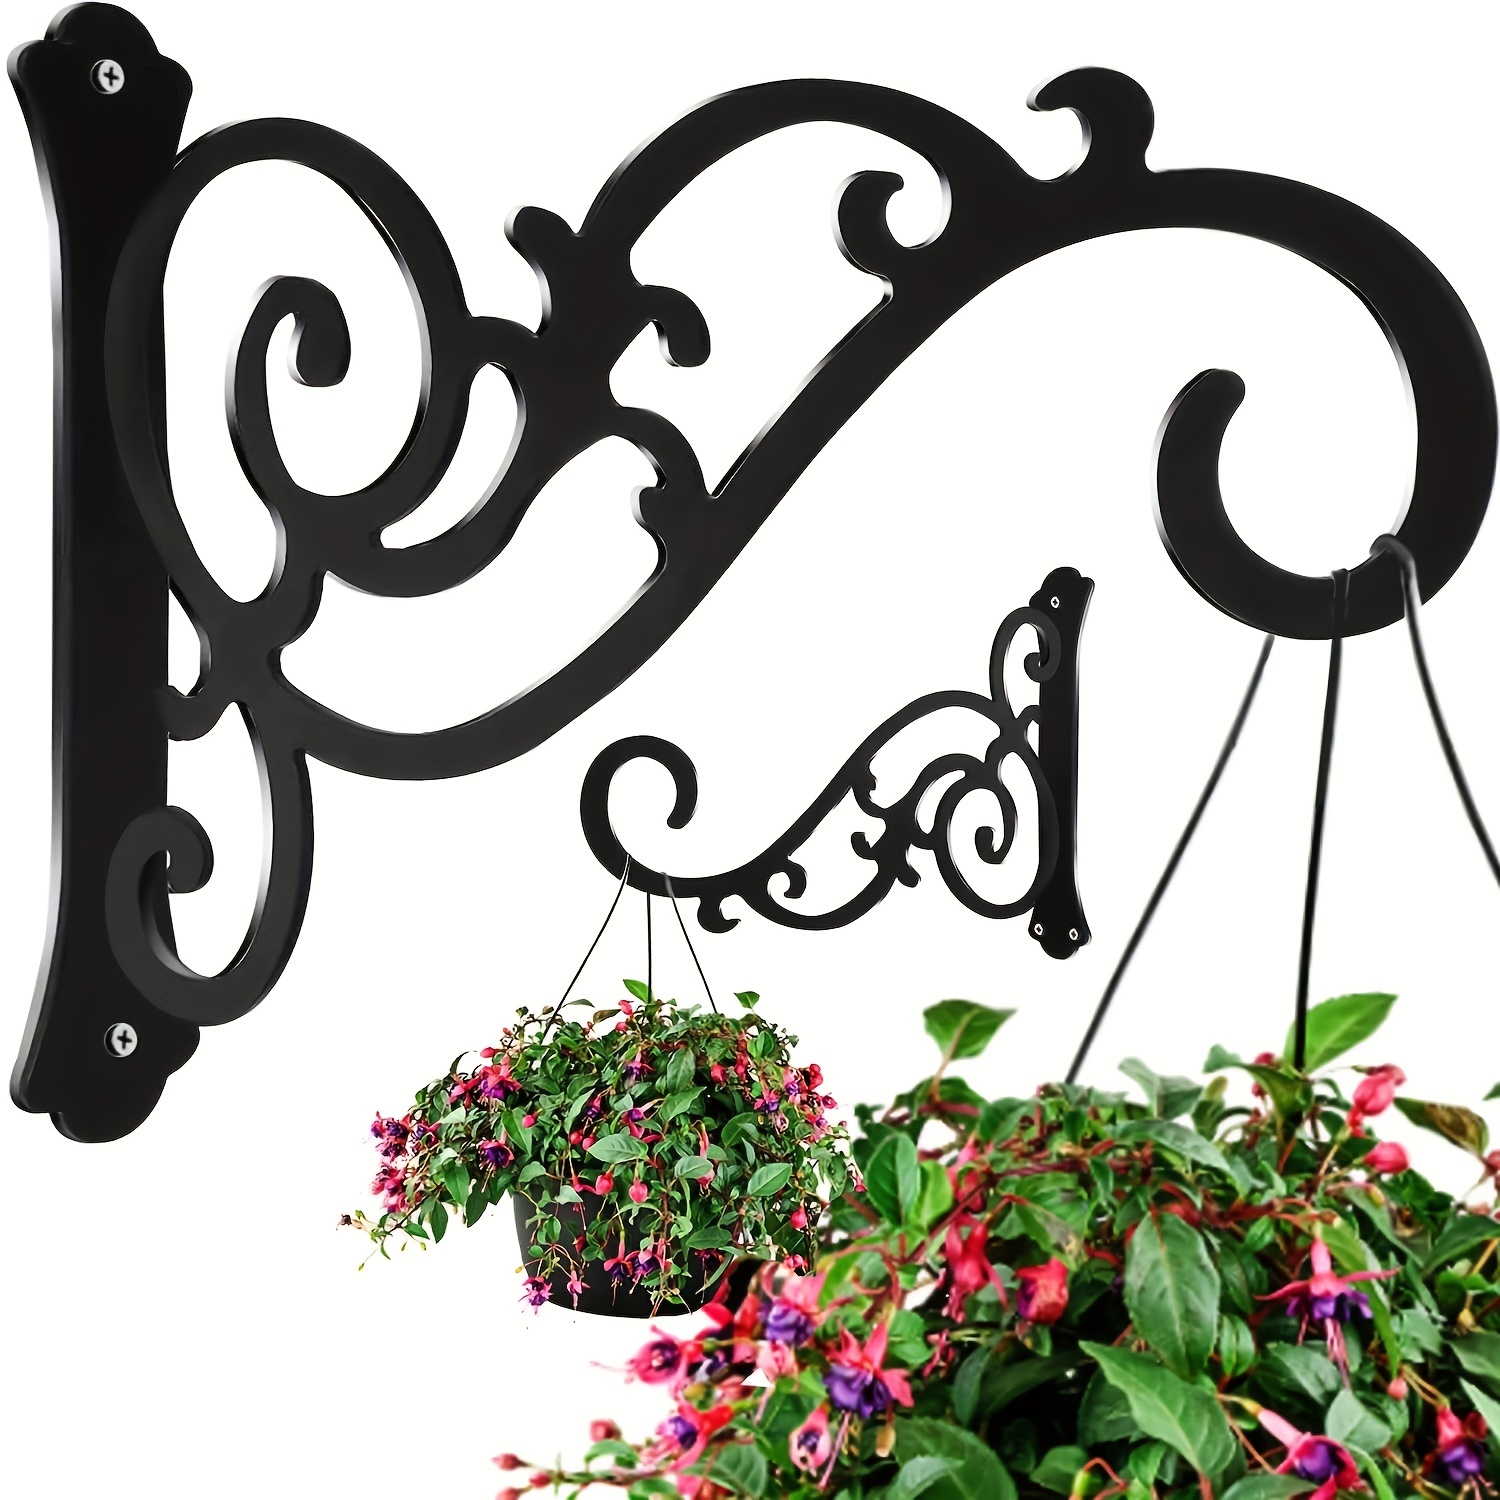 1 Set Wall Hook Hanging Plant Bracket Iron Hanging Hooks Screws Included,  Decorative Plant Hanger For Planters, Lanterns, Wind Chimes, Indoor Outdoor